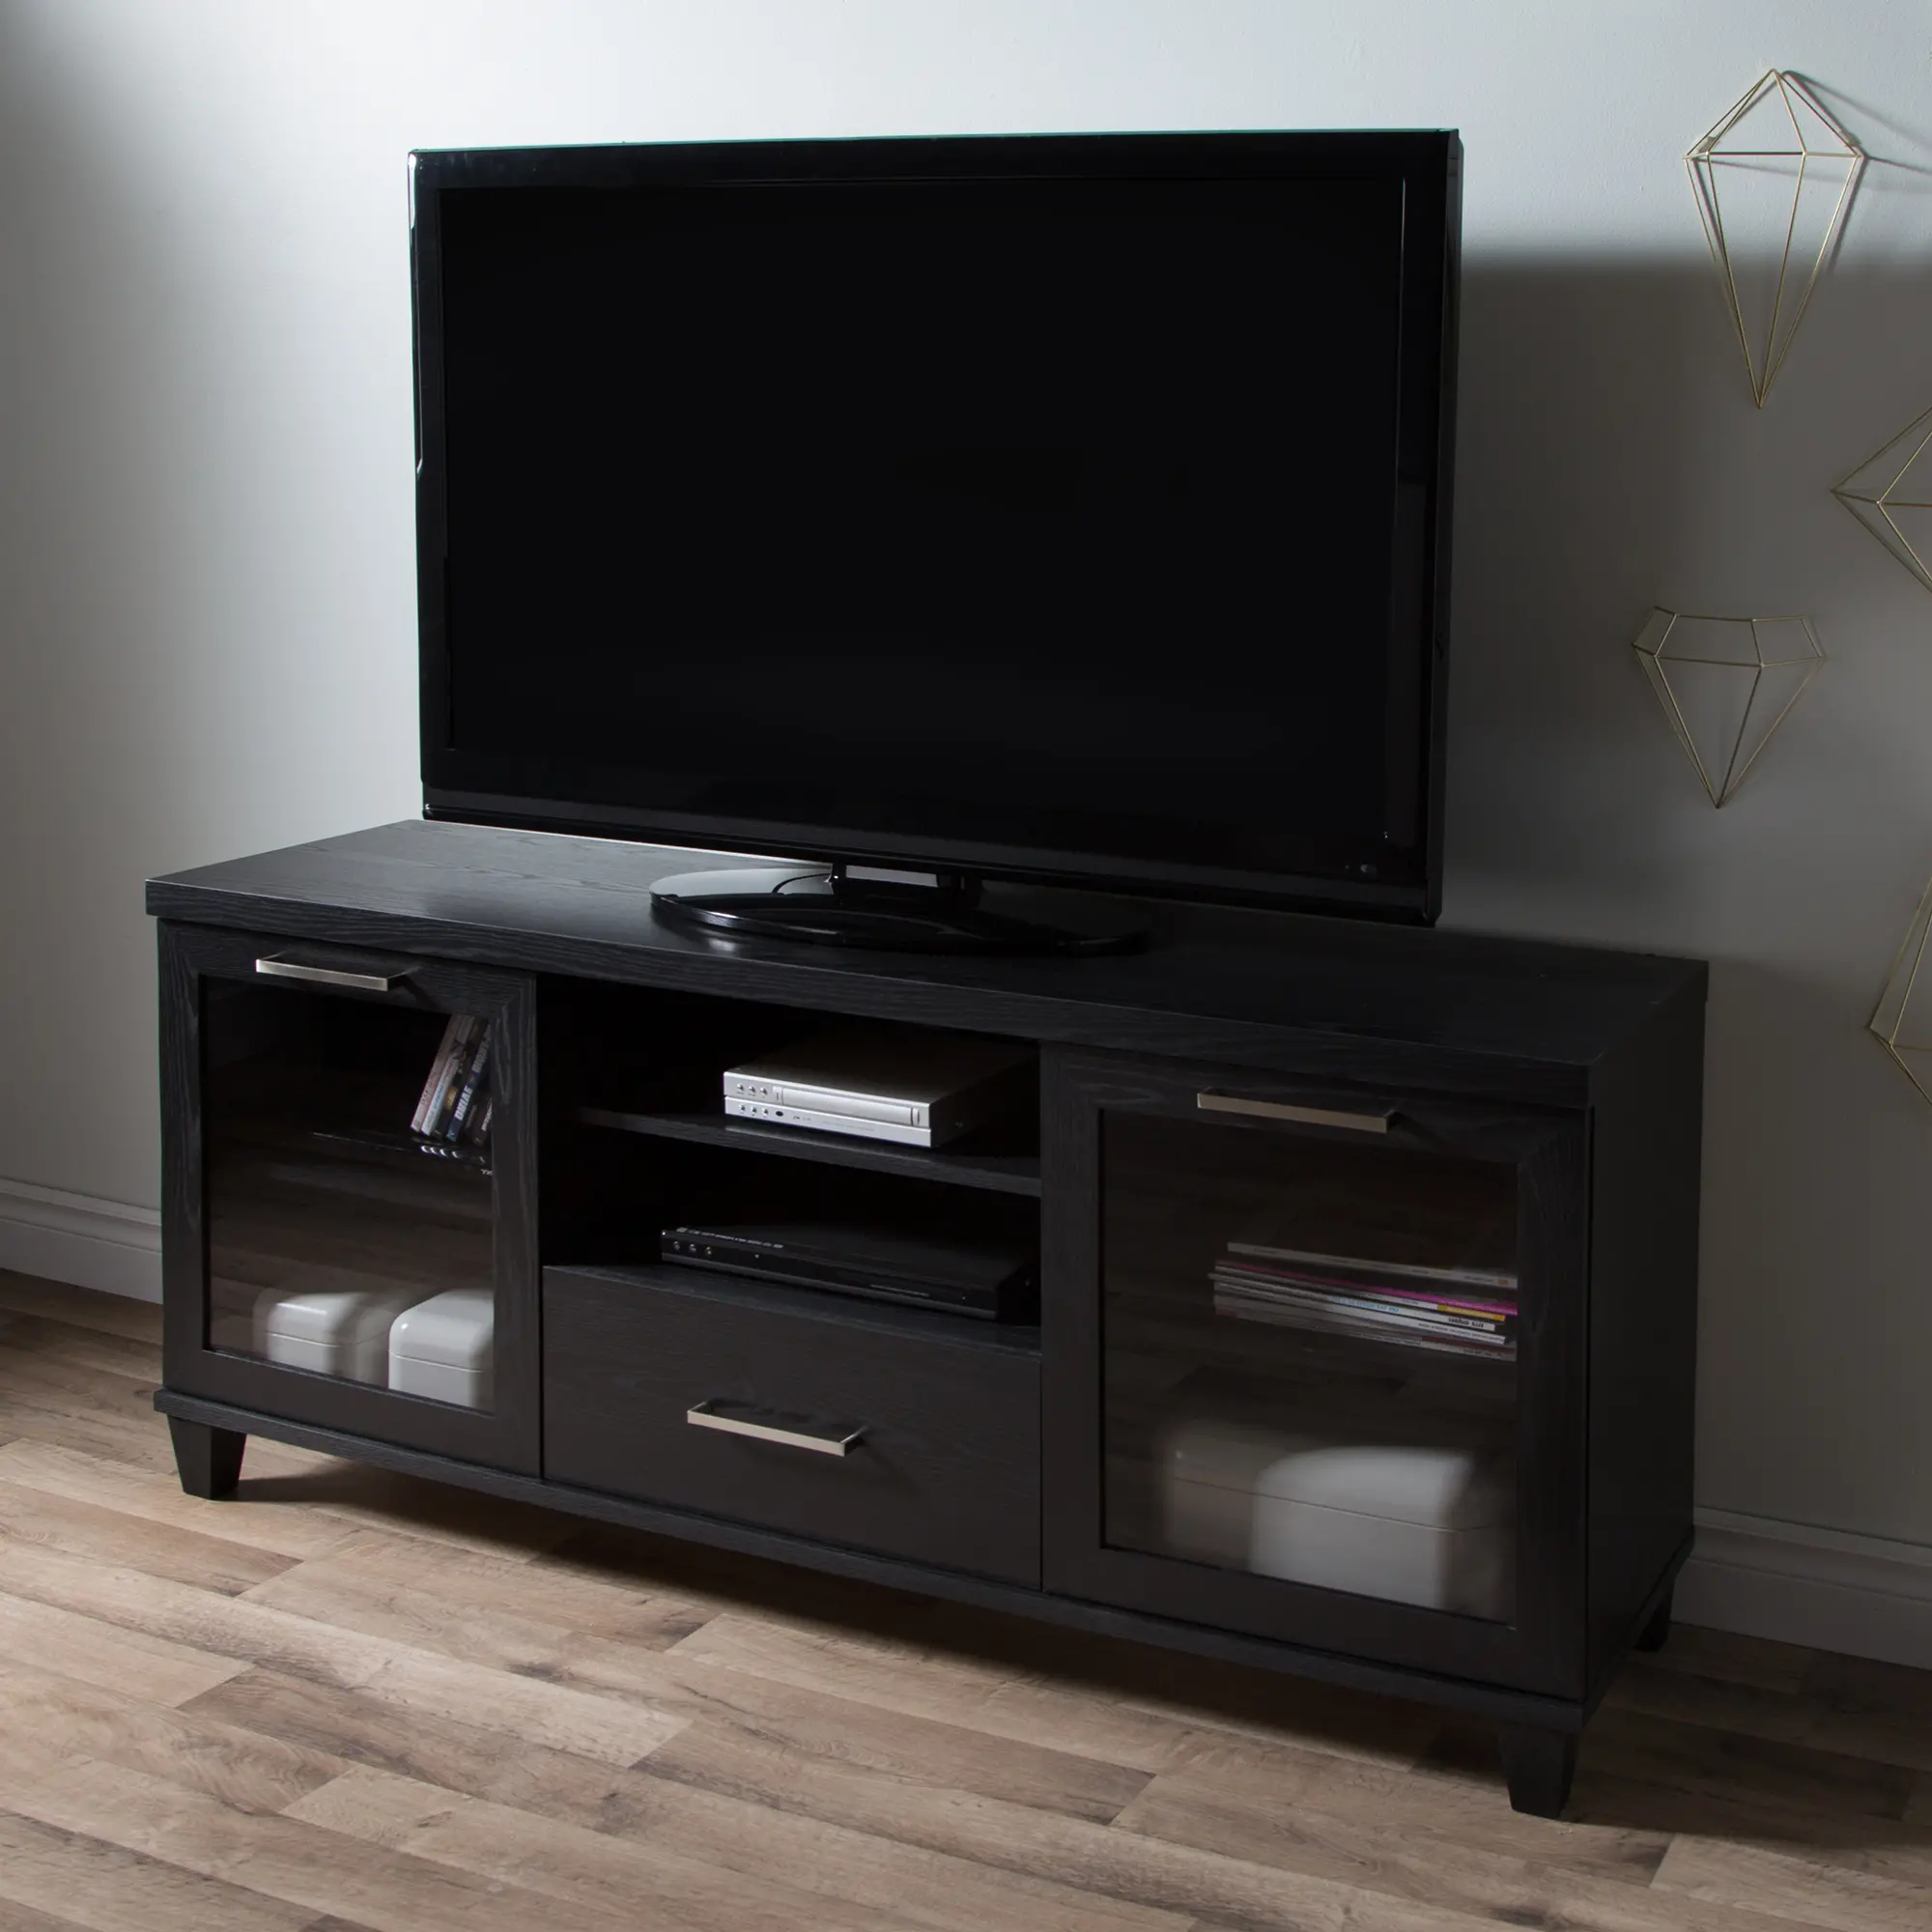 Adrian Black Oak TV Stand up to 60 Inch - South Shore